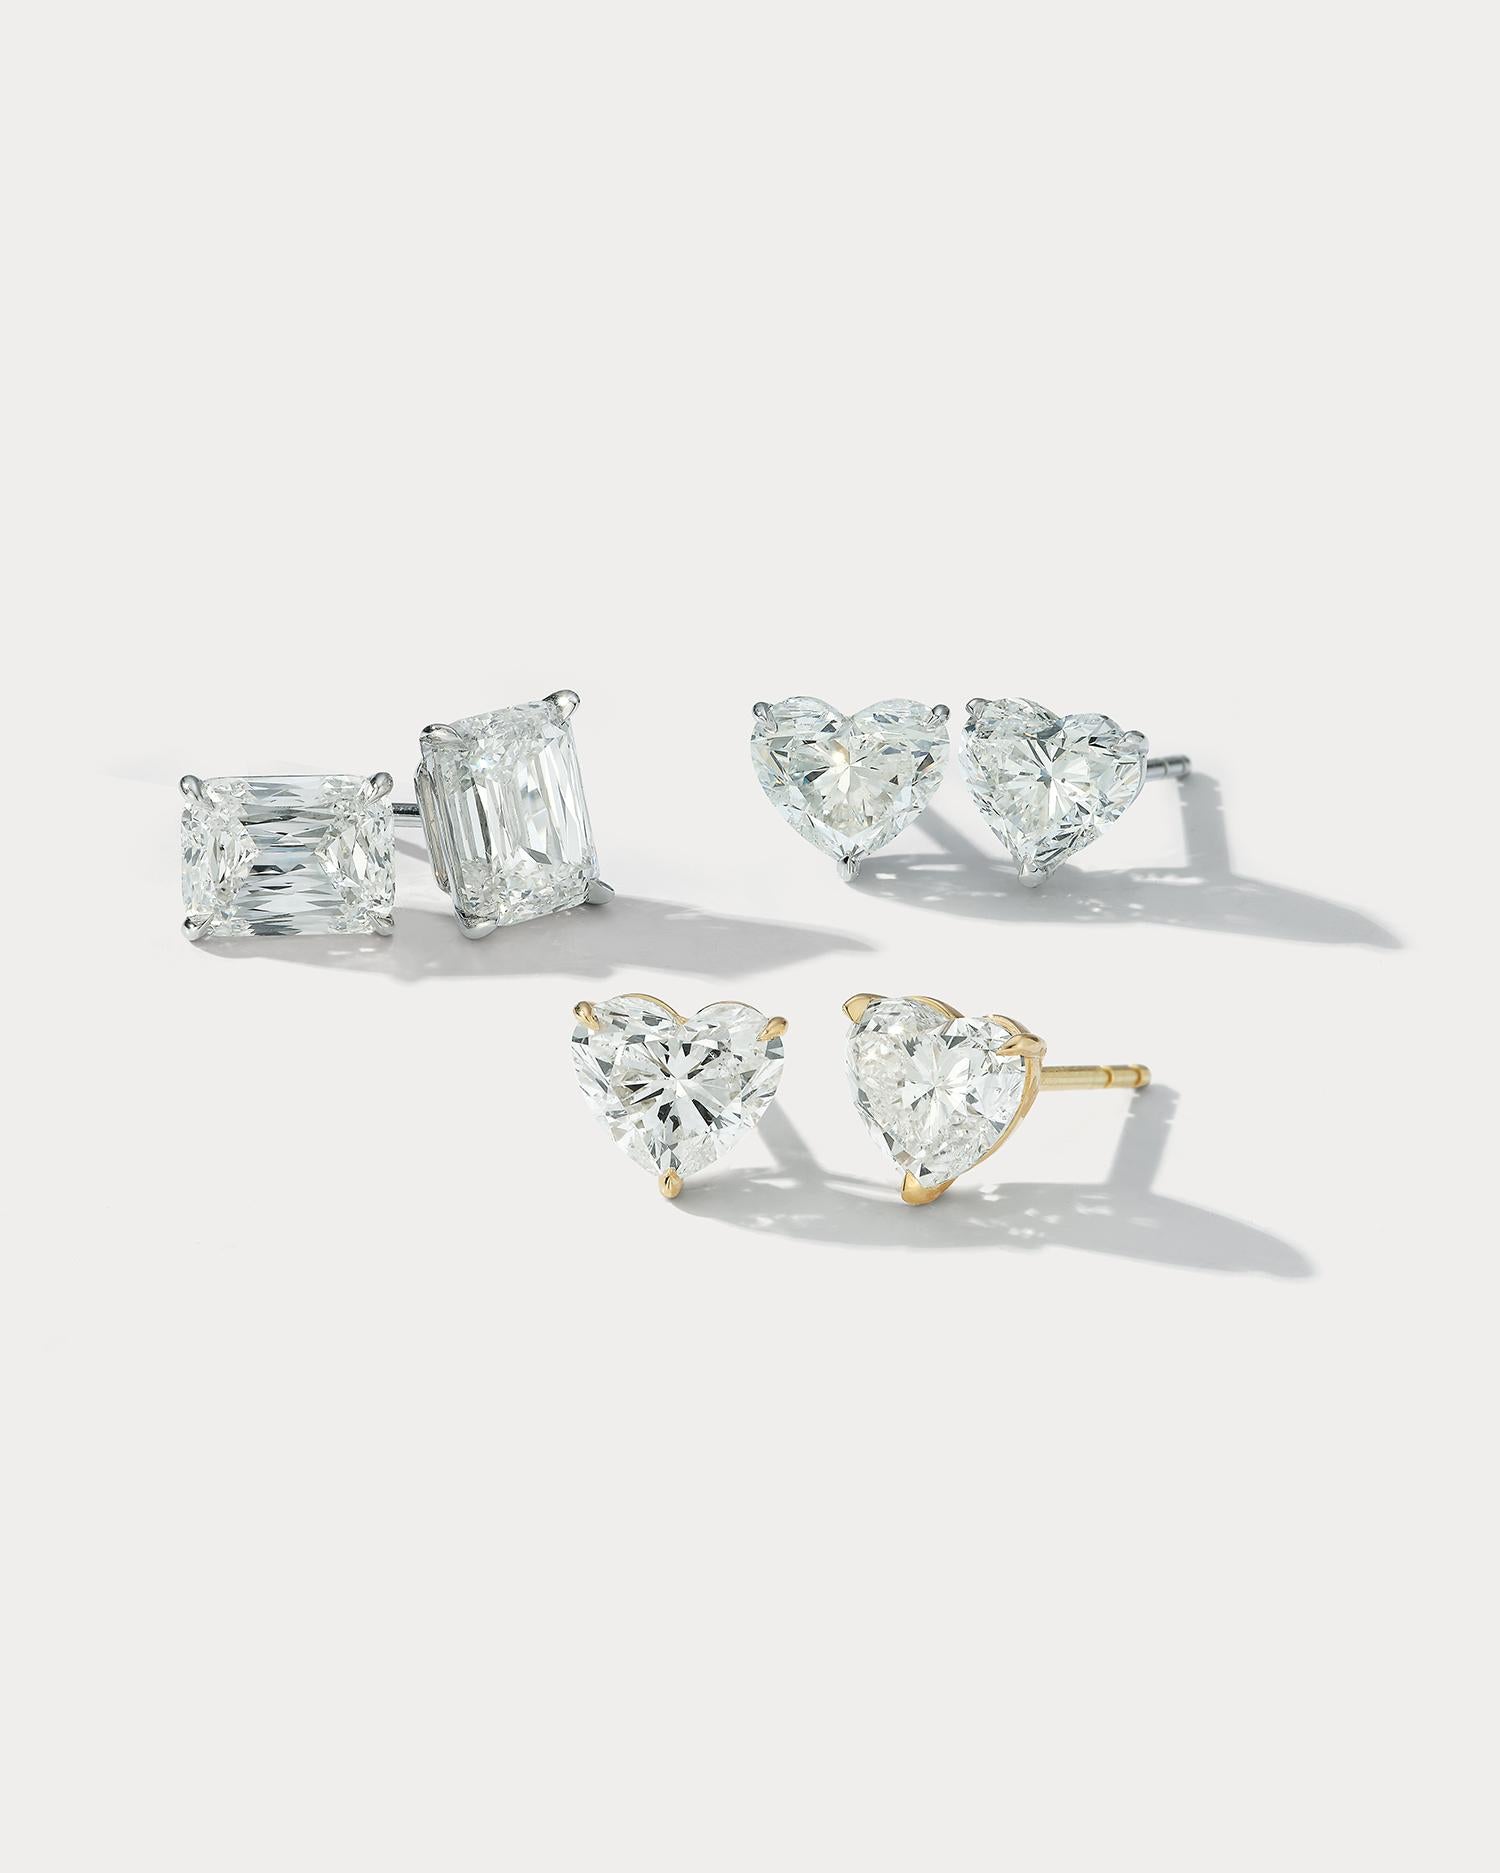 Make a stunning impression with these gorgeous 6 carat cushion cut diamond stud earrings. The cushion cut stones are perfectly proportioned to catch the light with every movement, creating a breathtaking sparkle. The stud design is timeless,